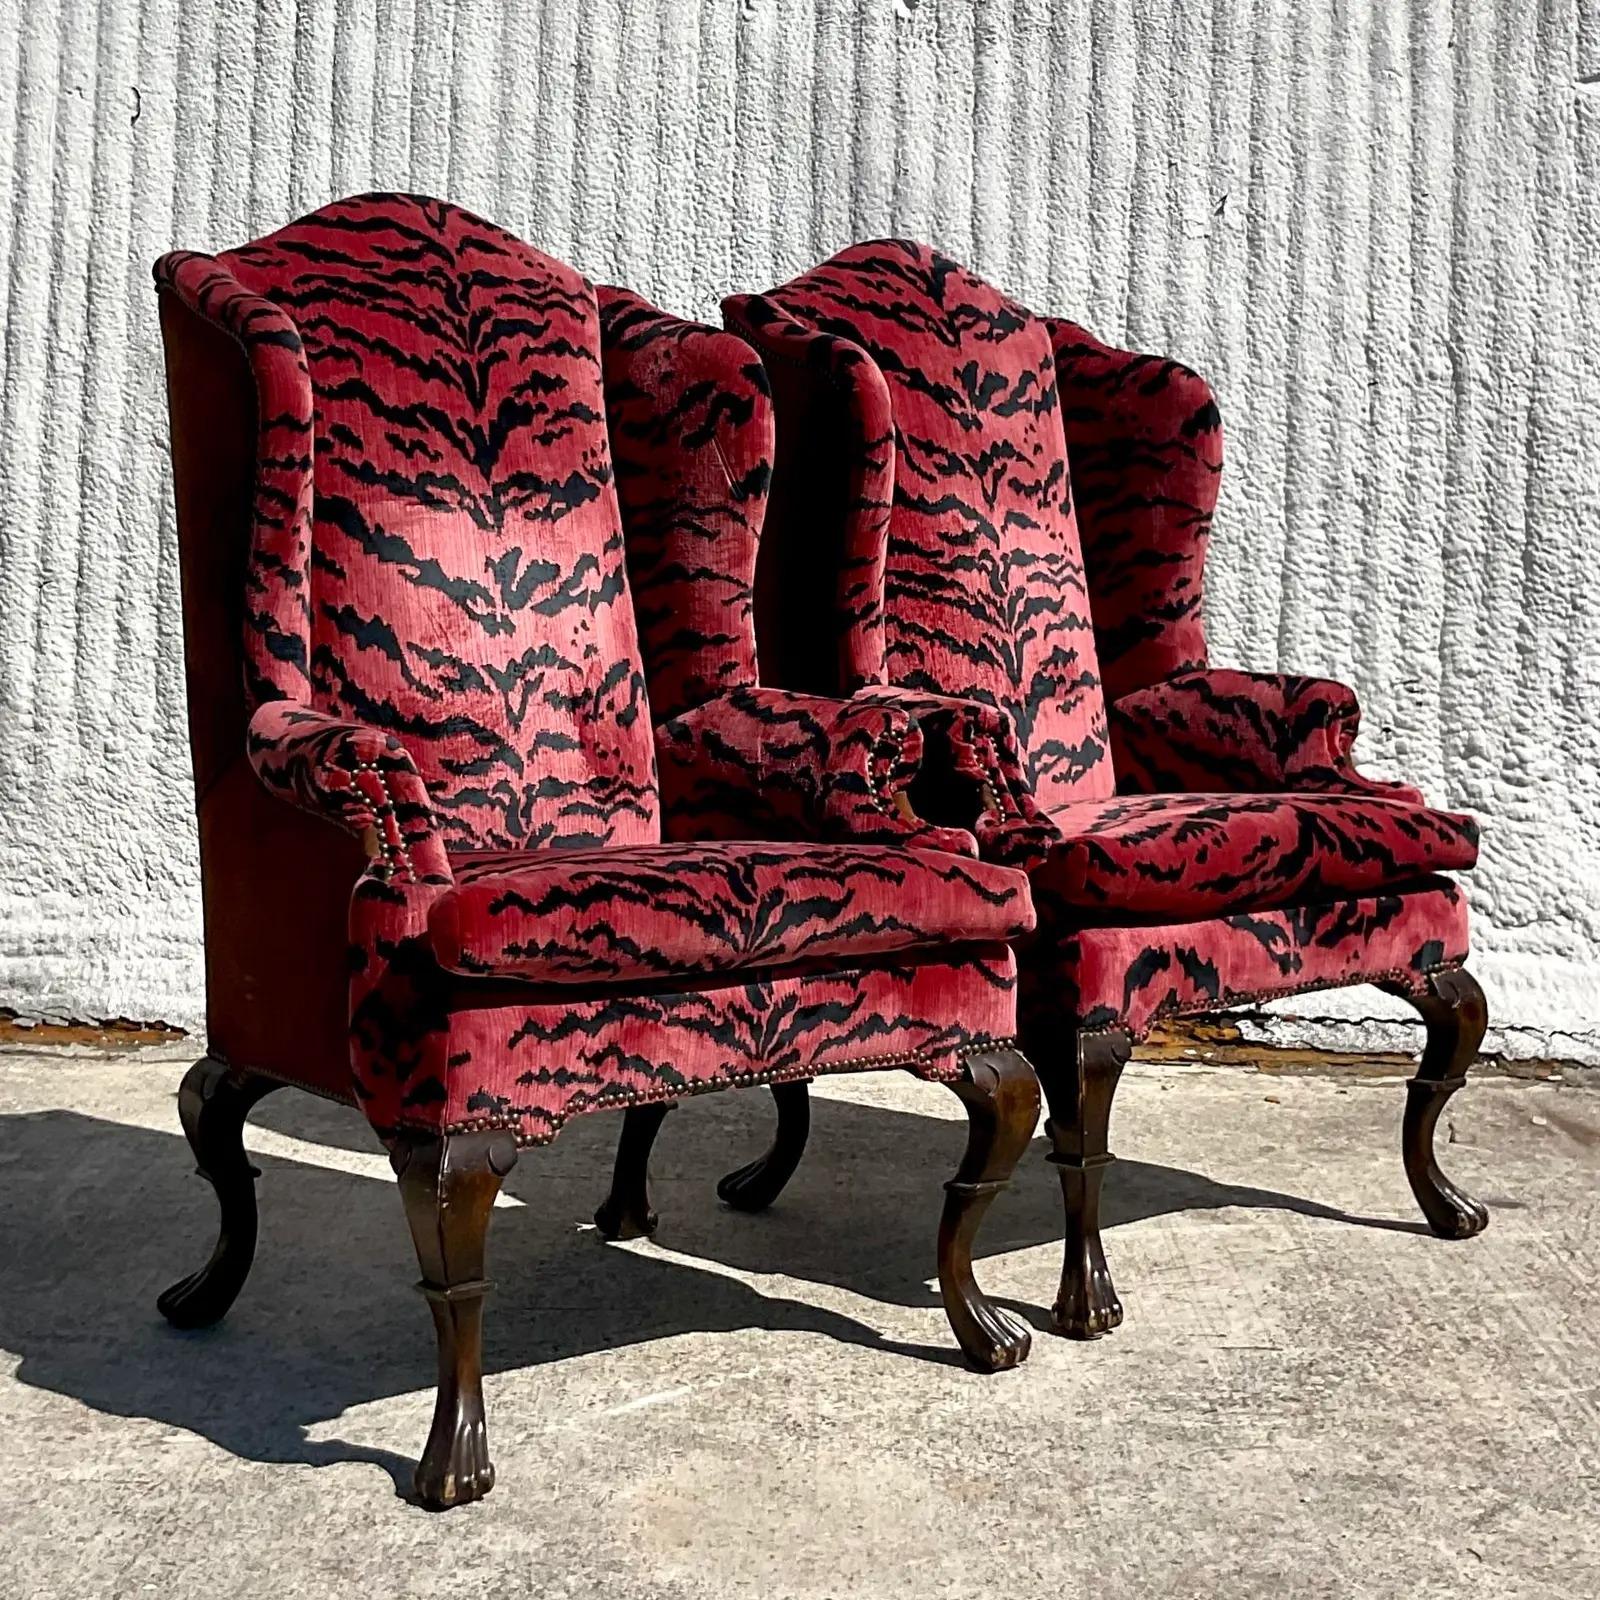 20th Century Vintage Regency Scalamandre “Le Tigre” Velvet and Suede Wingback Chairs, a Pair